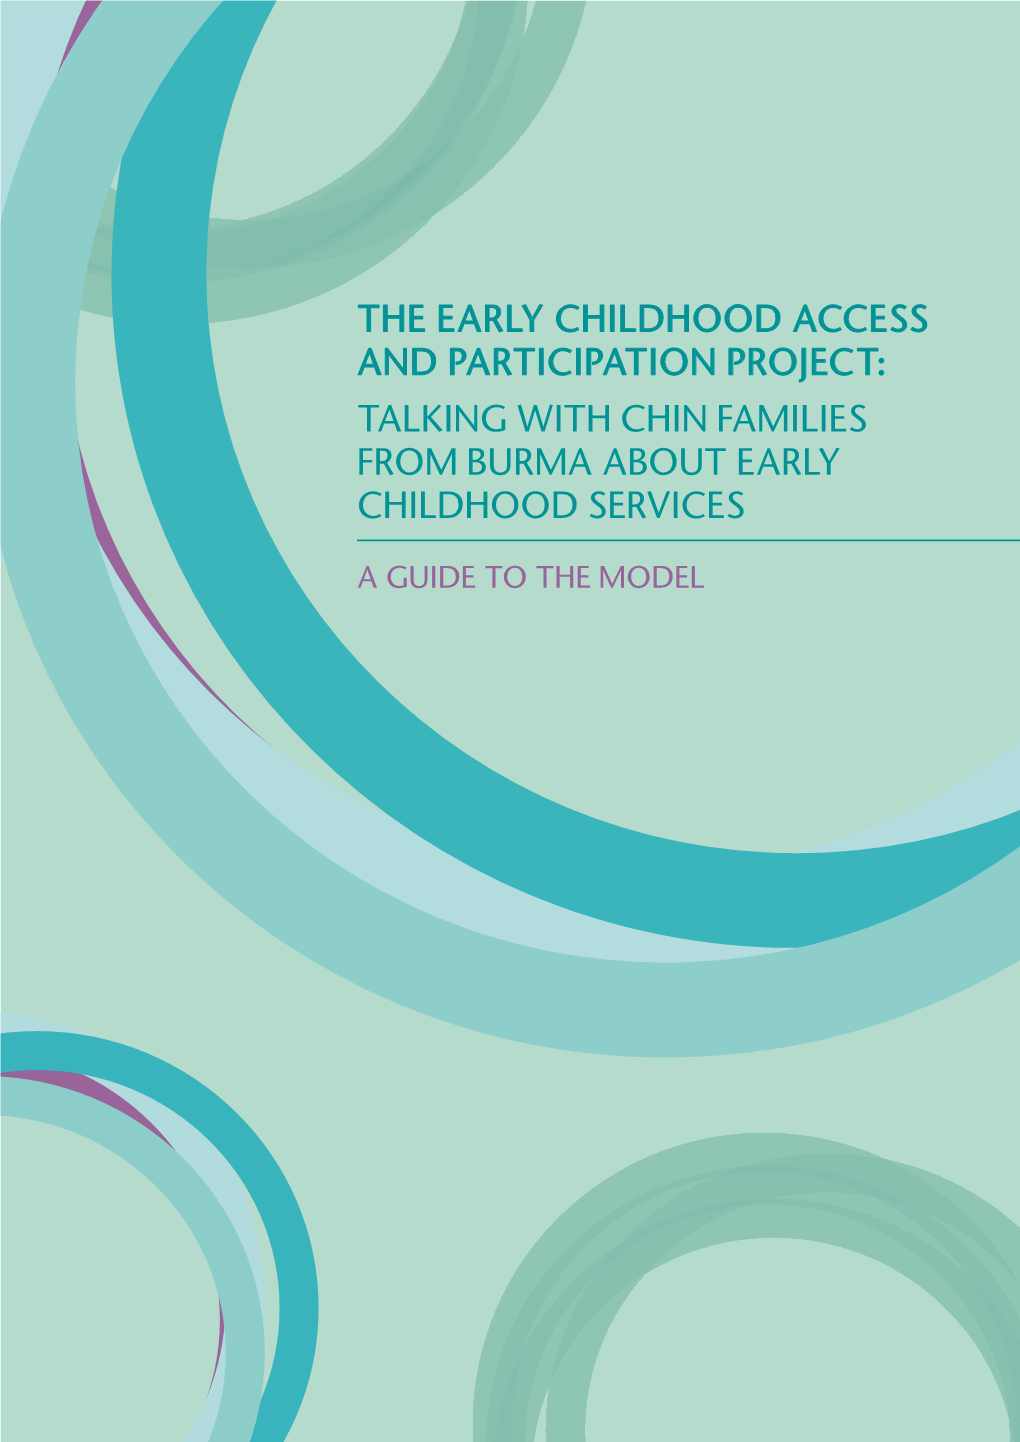 The Early Childhood Access and Participation Project: Talking with Chin Families from Burma About Early Childhood Services